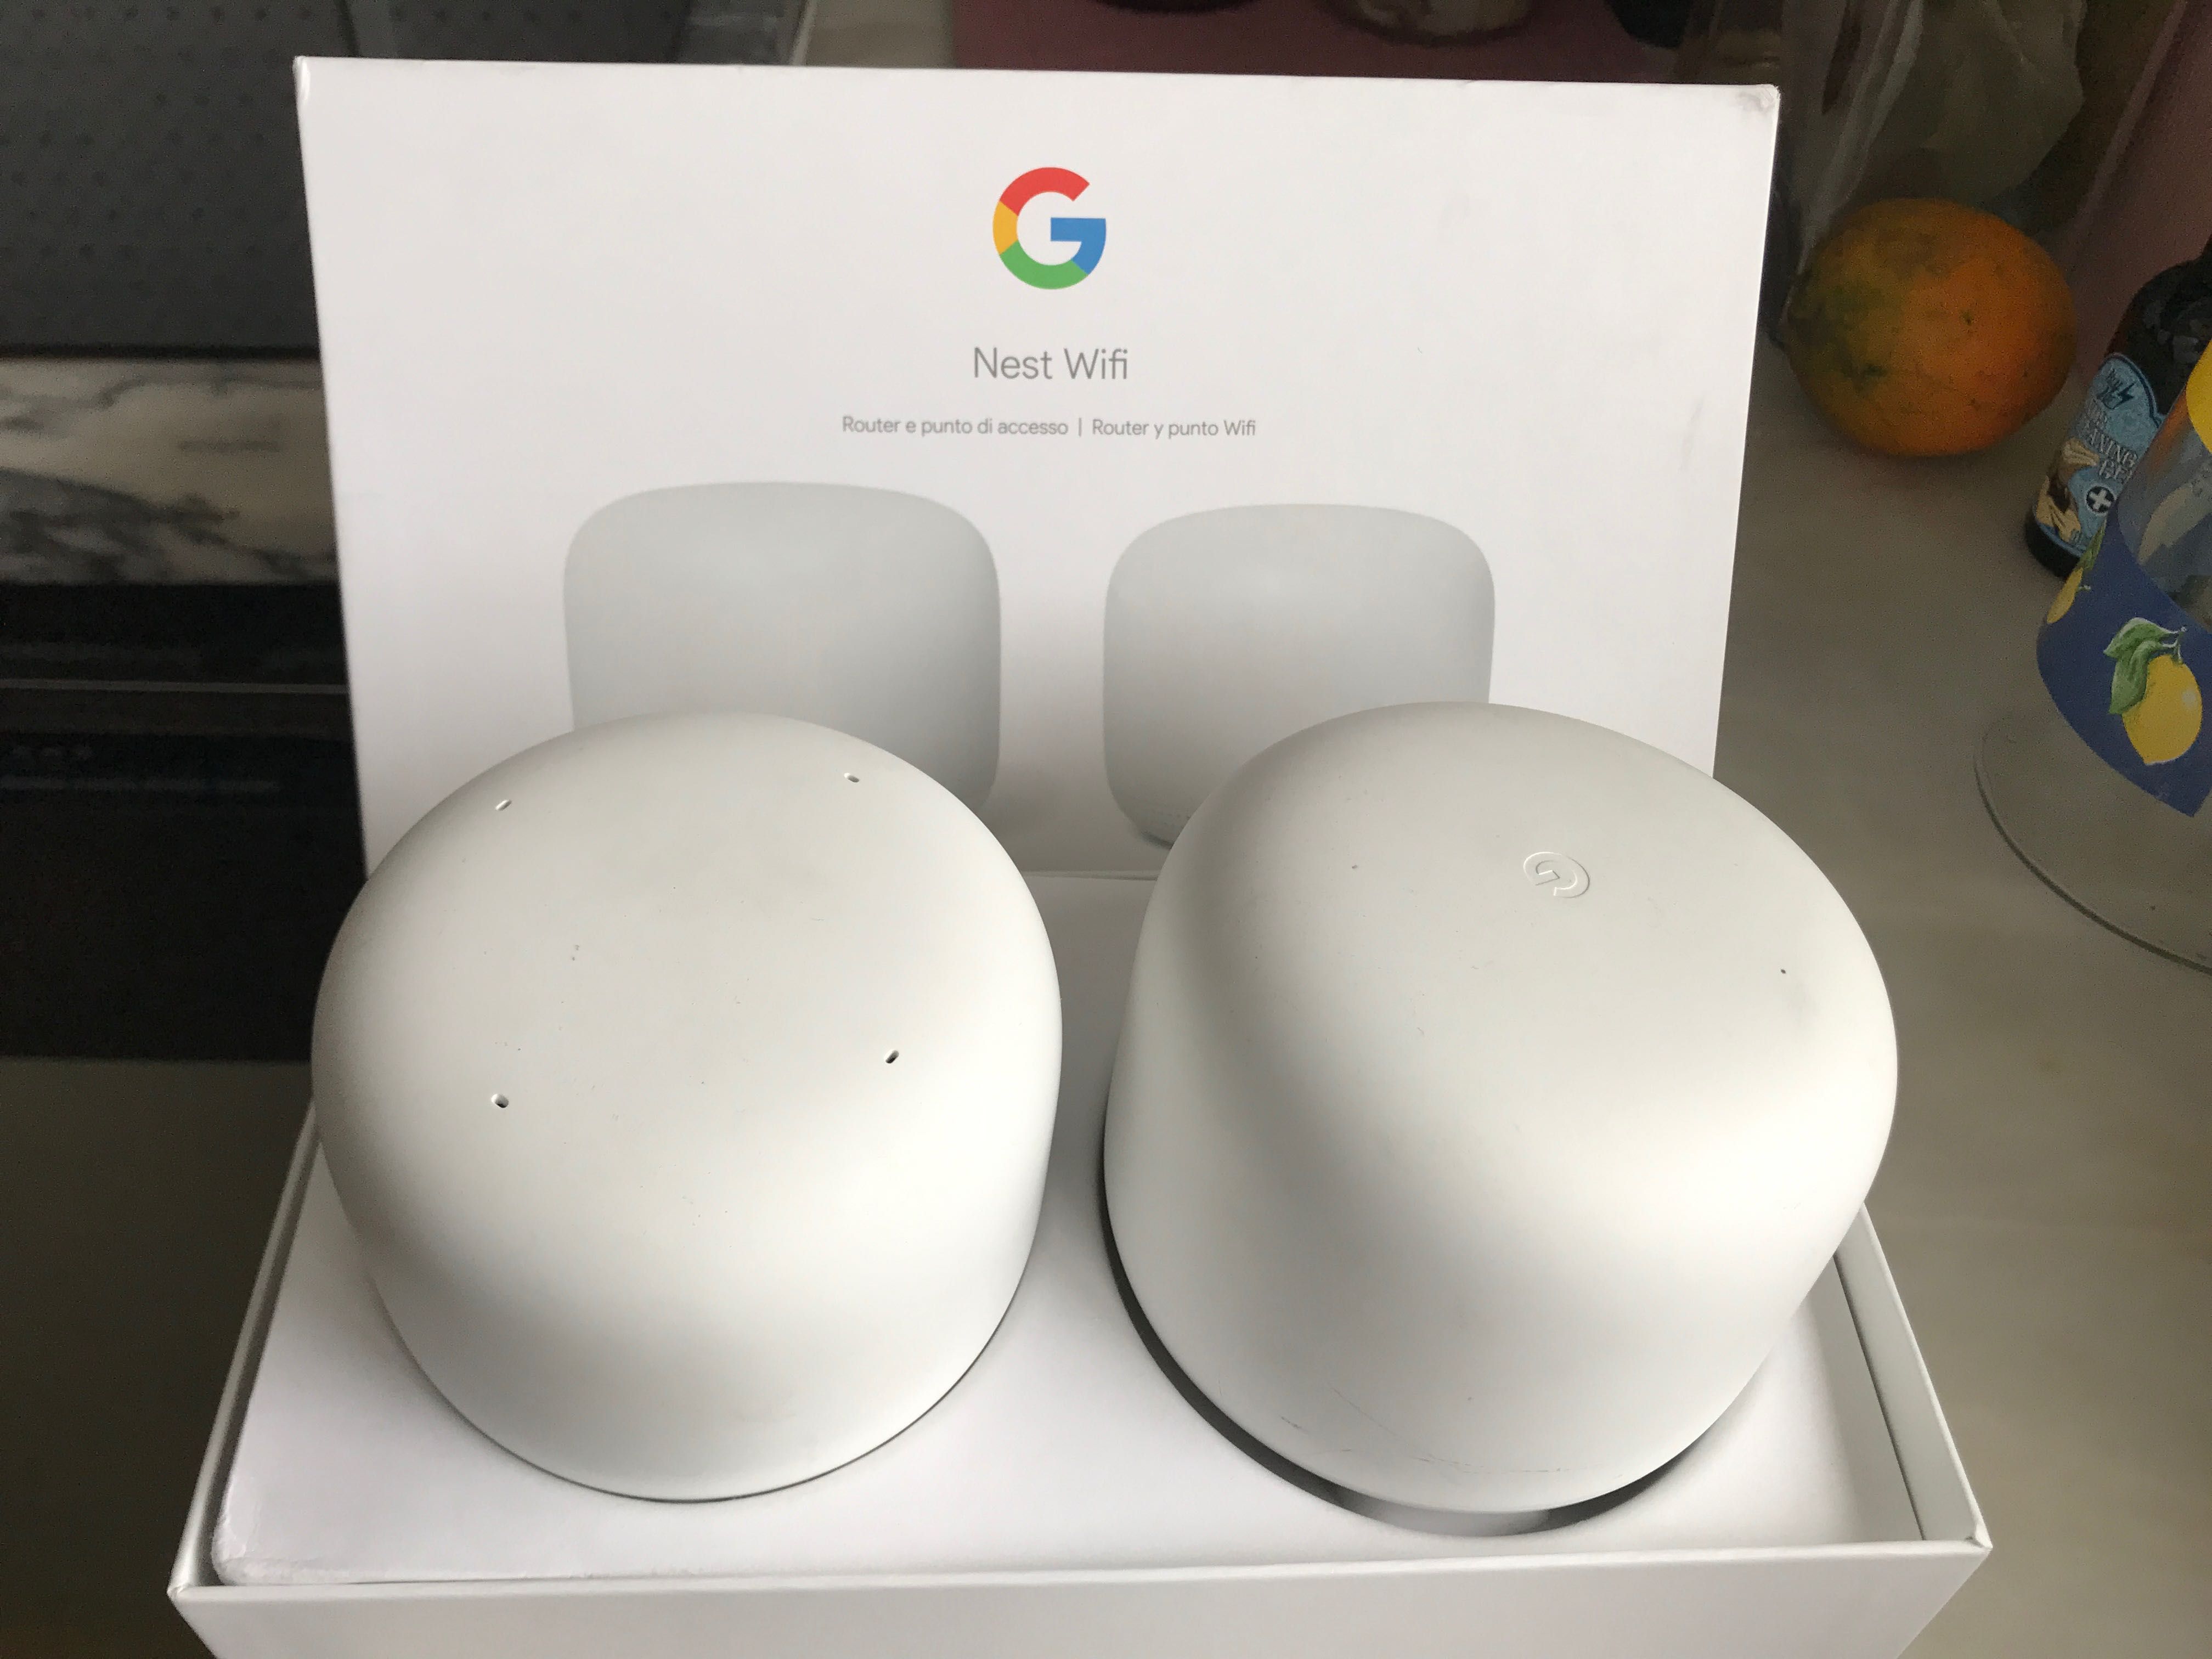 Google Nest Wi-Fi Router + Acess Point